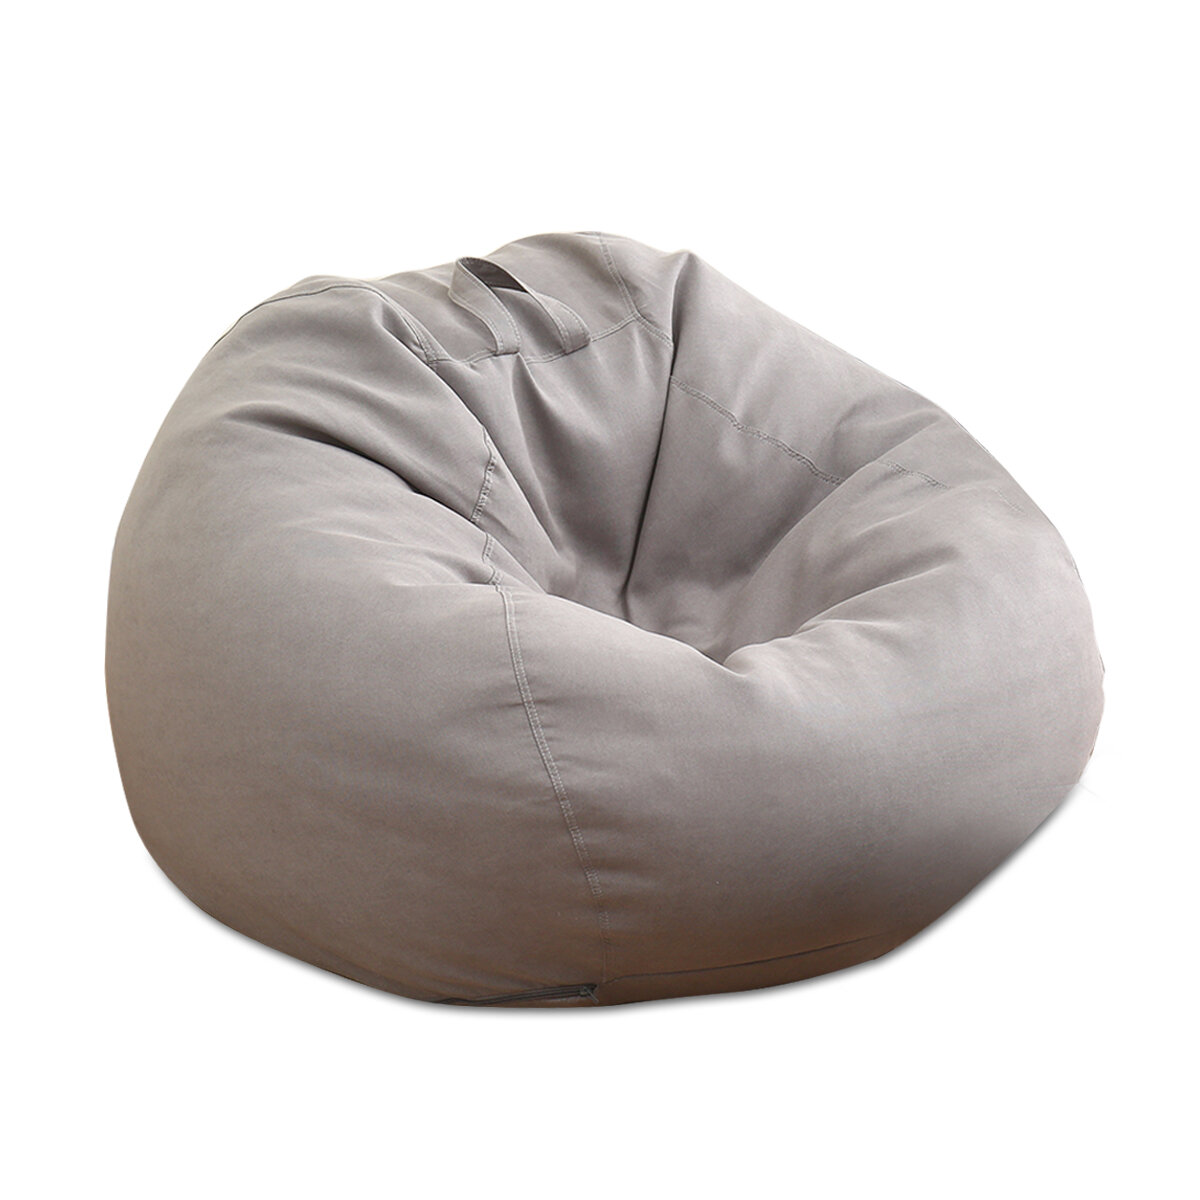 

Lazy Sofa Large Bean Bag Cover Chair Cushion Pillow Lounger Couch Seat Indoor